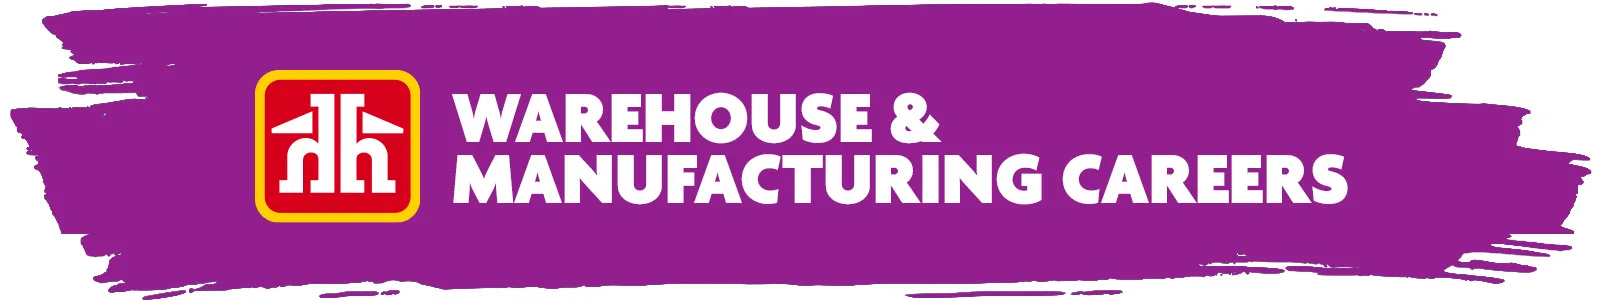 Warehouse & Manufacturing Careers